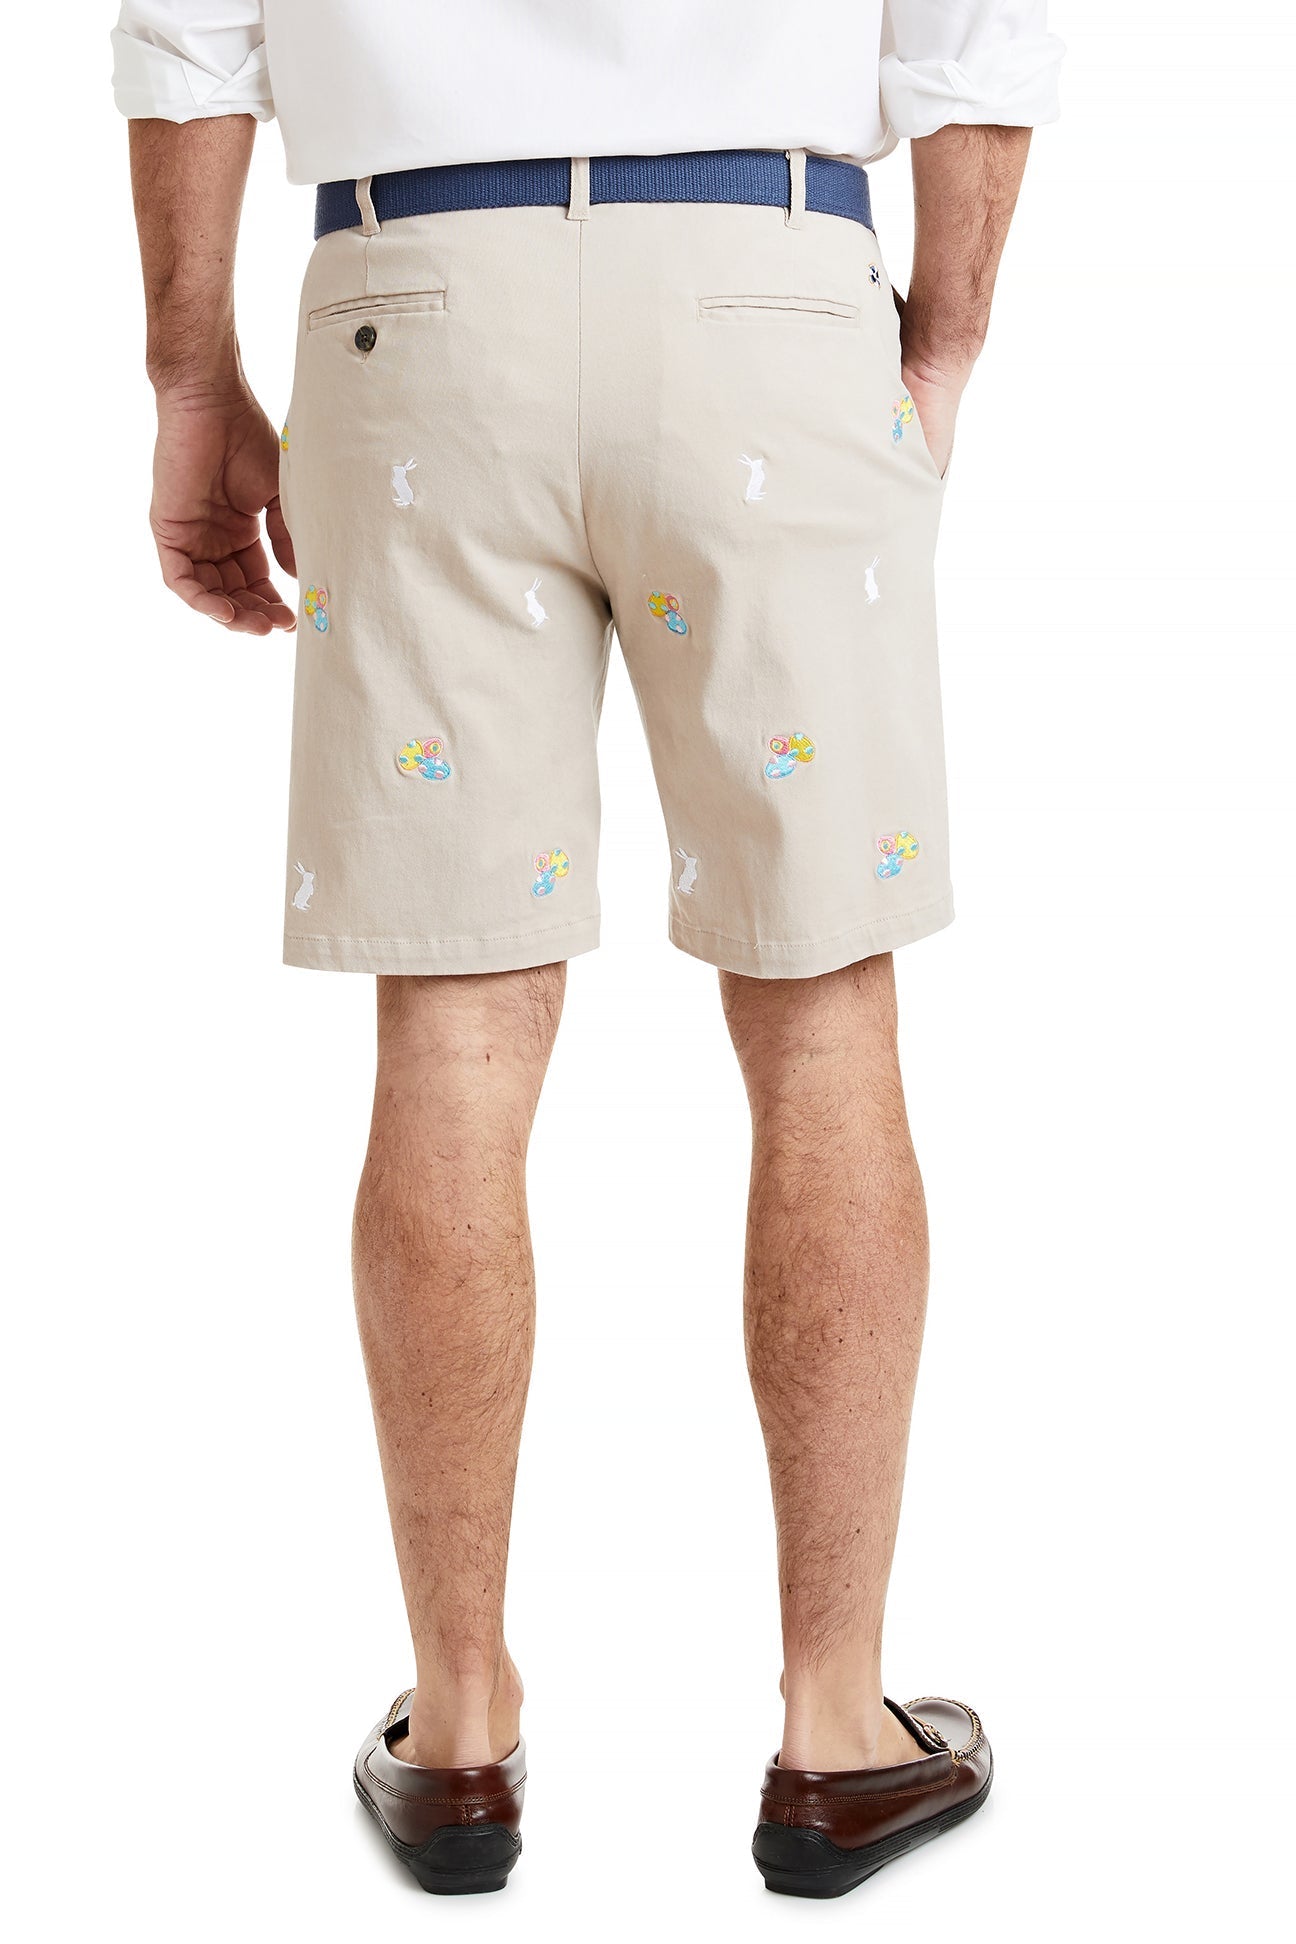 Cisco Short Stretch Twill Stone with Easter Eggs & Bunny MENS EMBROIDERED SHORTS Castaway Nantucket Island